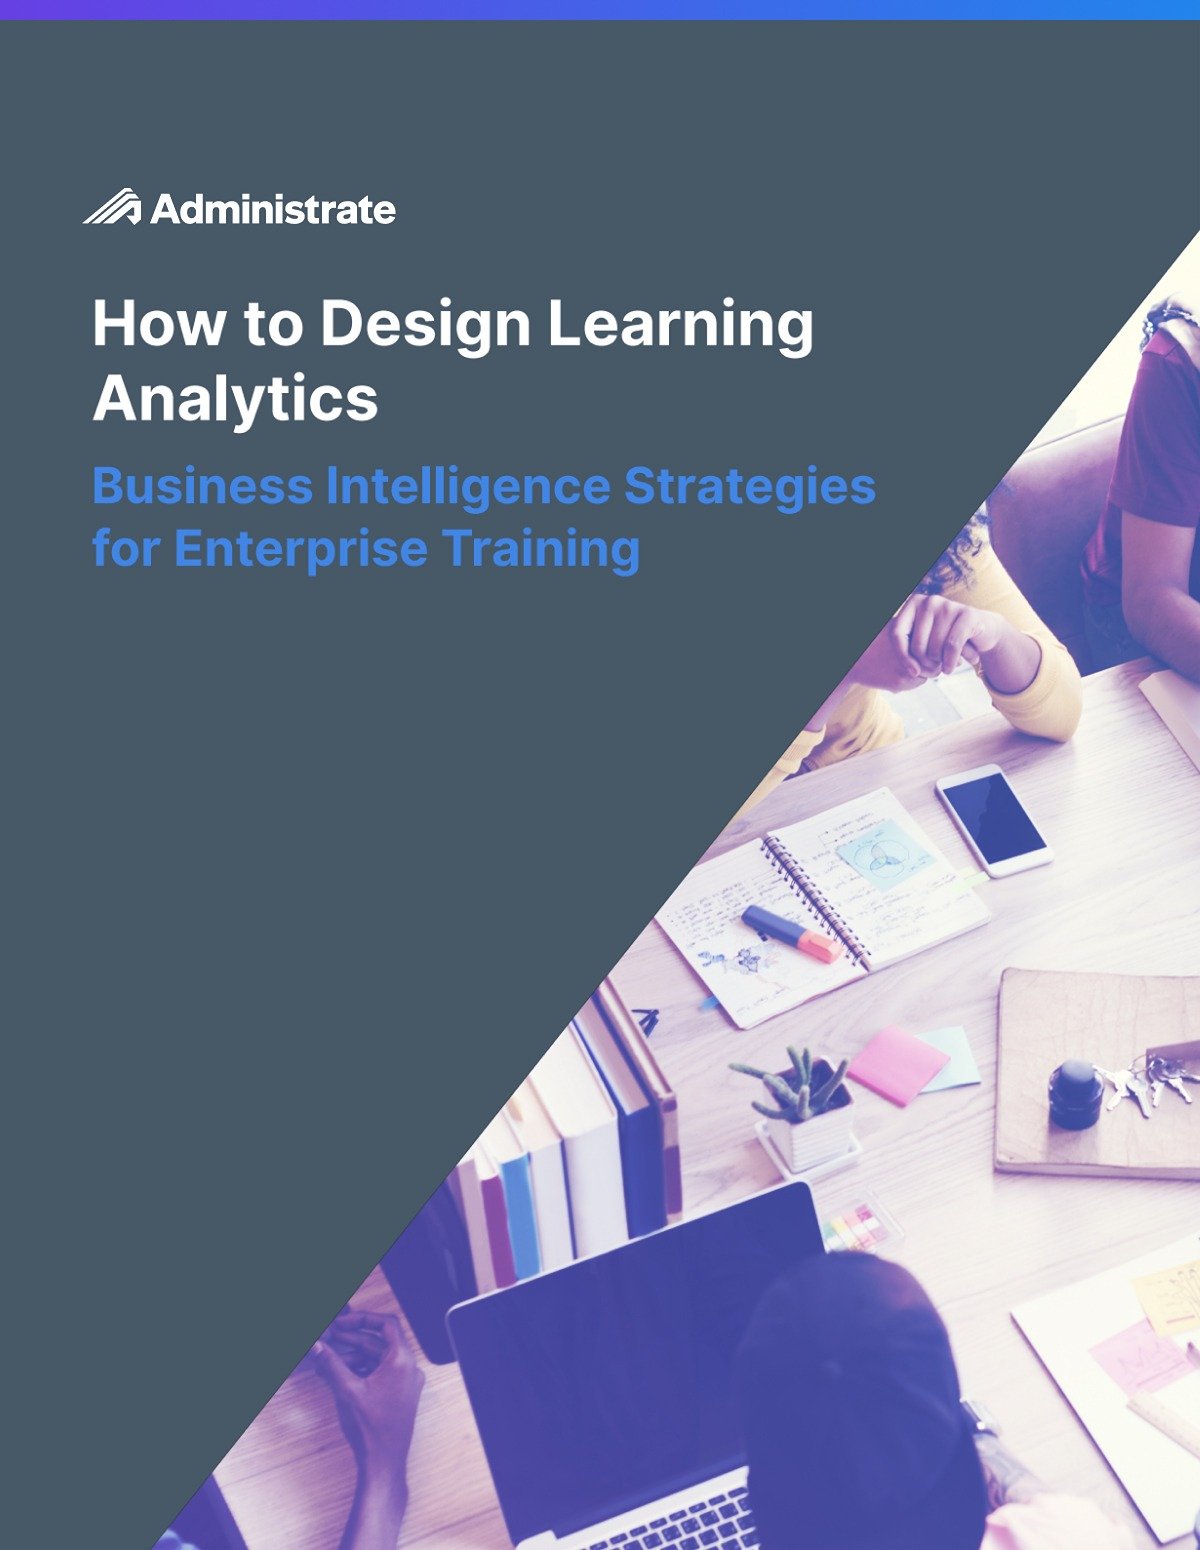 How to Design Learning Analytics